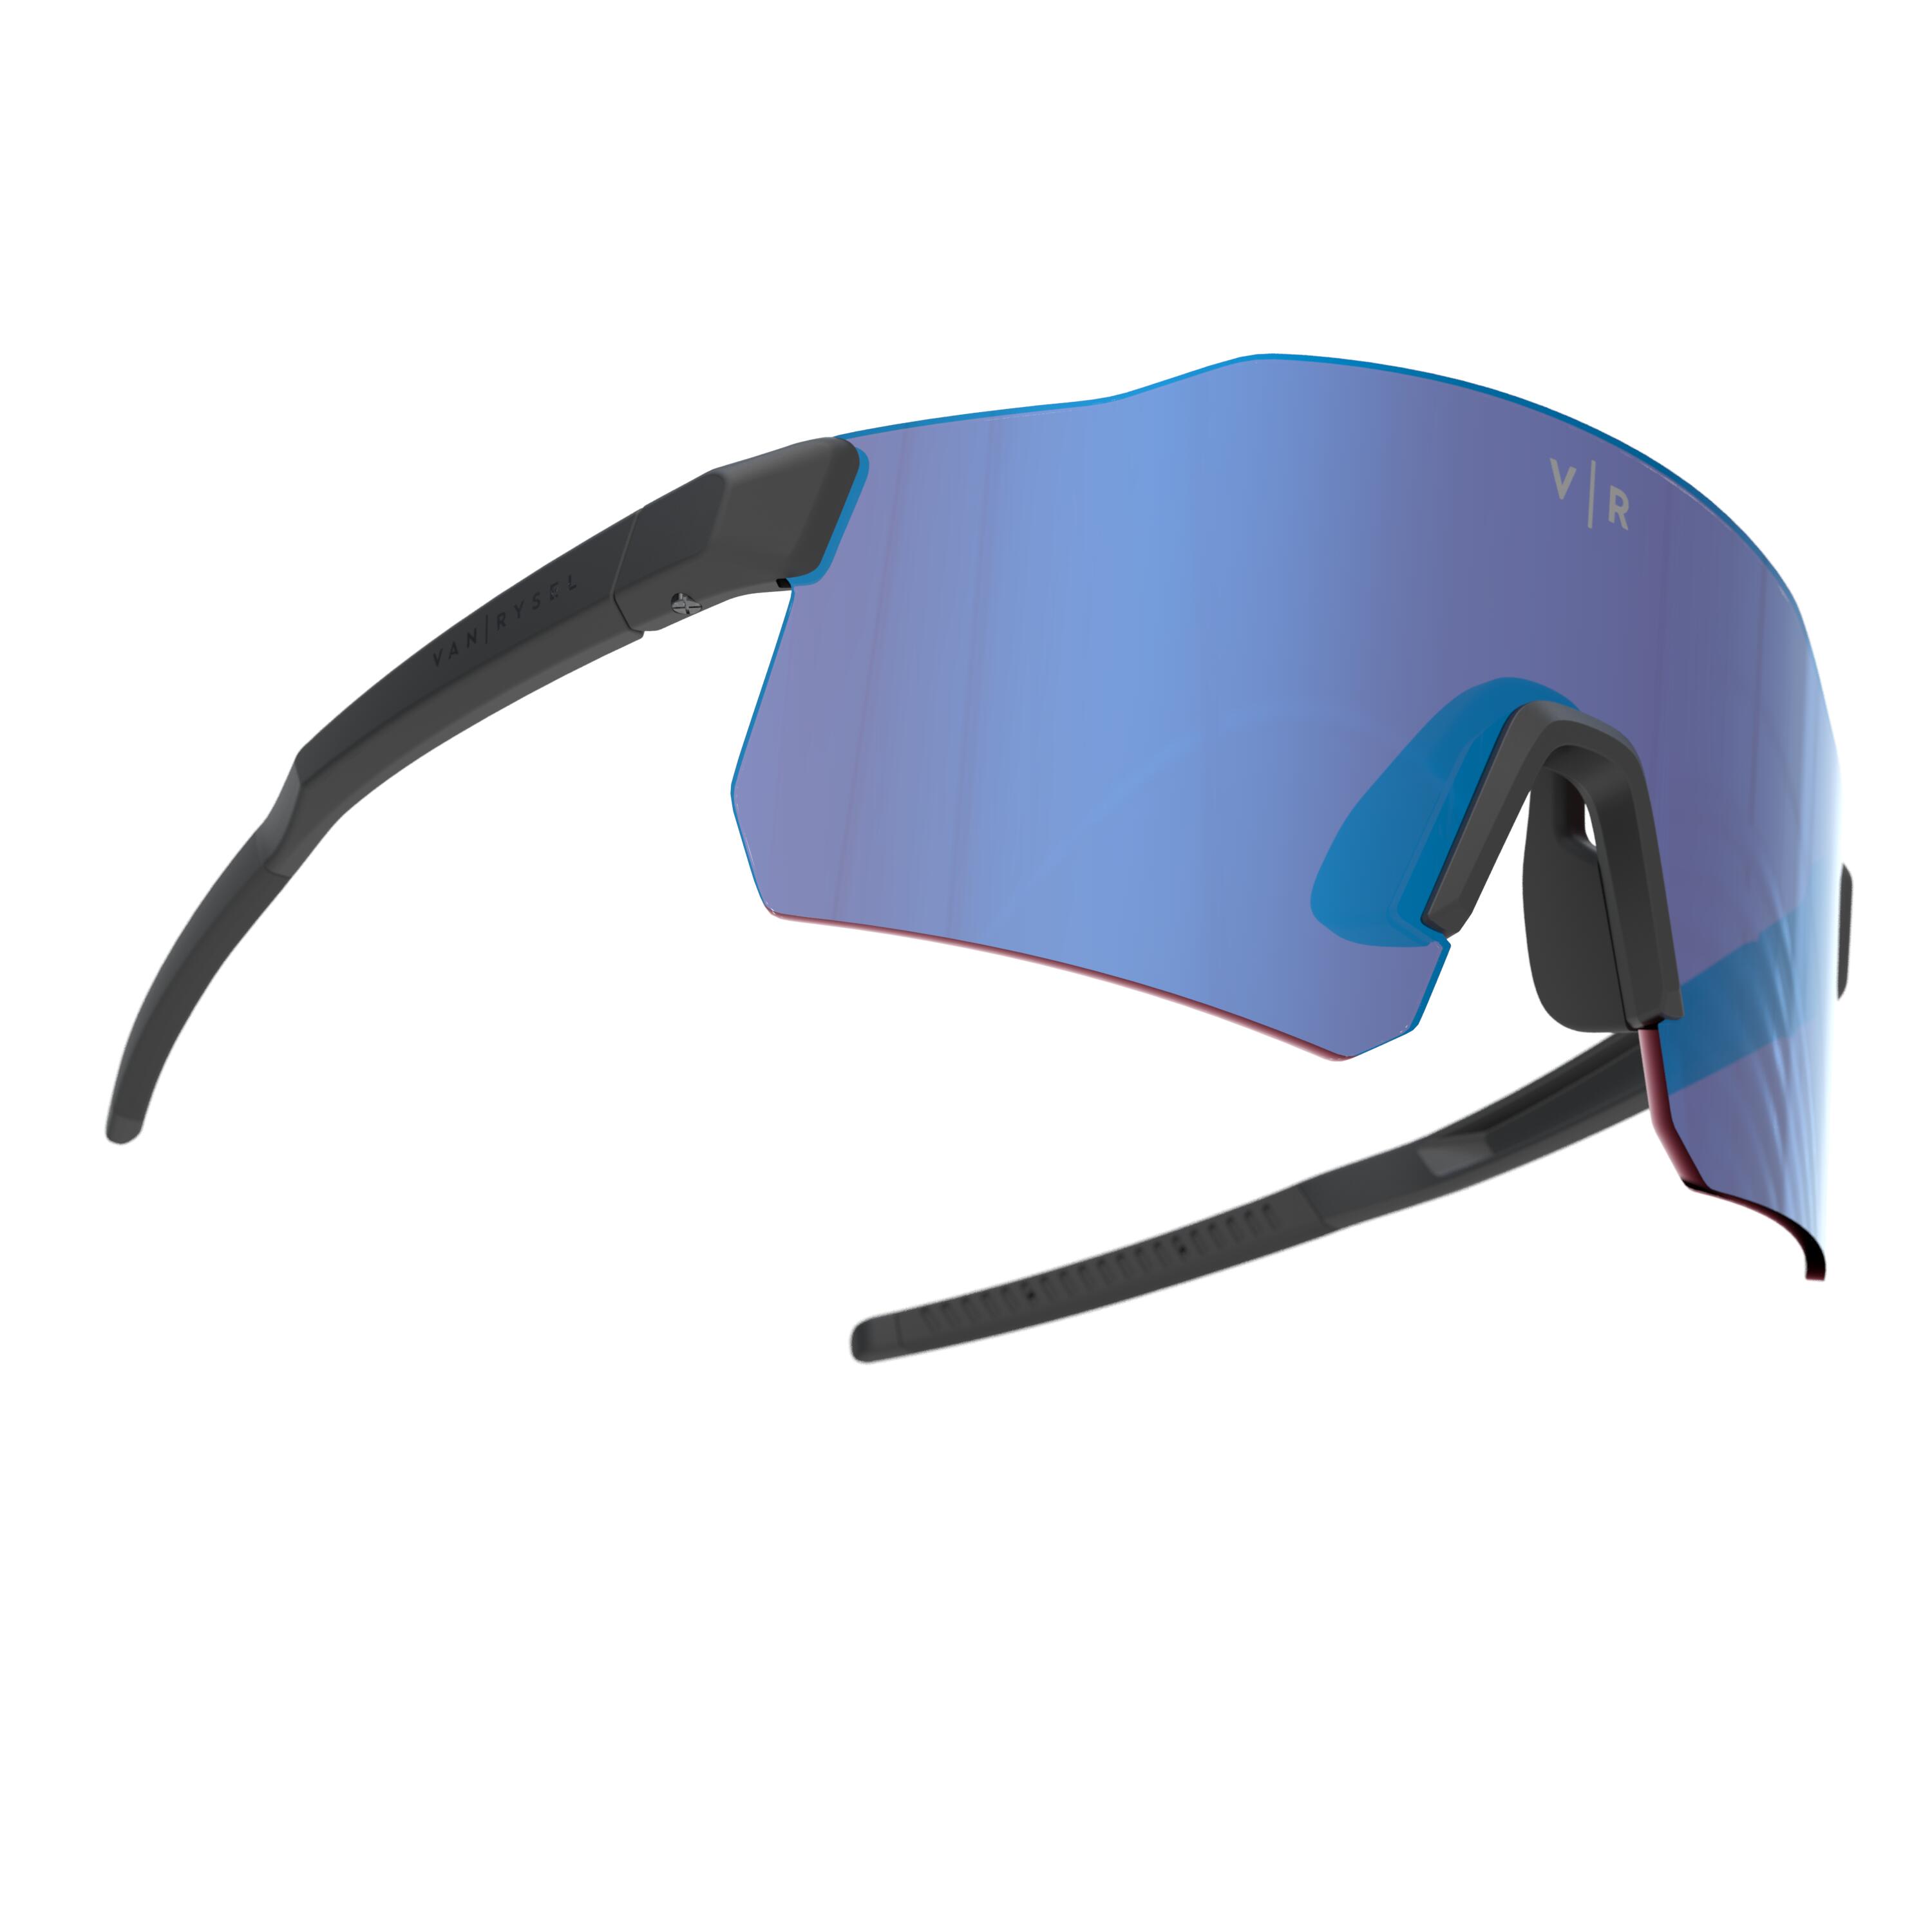 Adult Cycling Sunglasses RoadR 920 Category 3 High-Definition - Blue 5/6